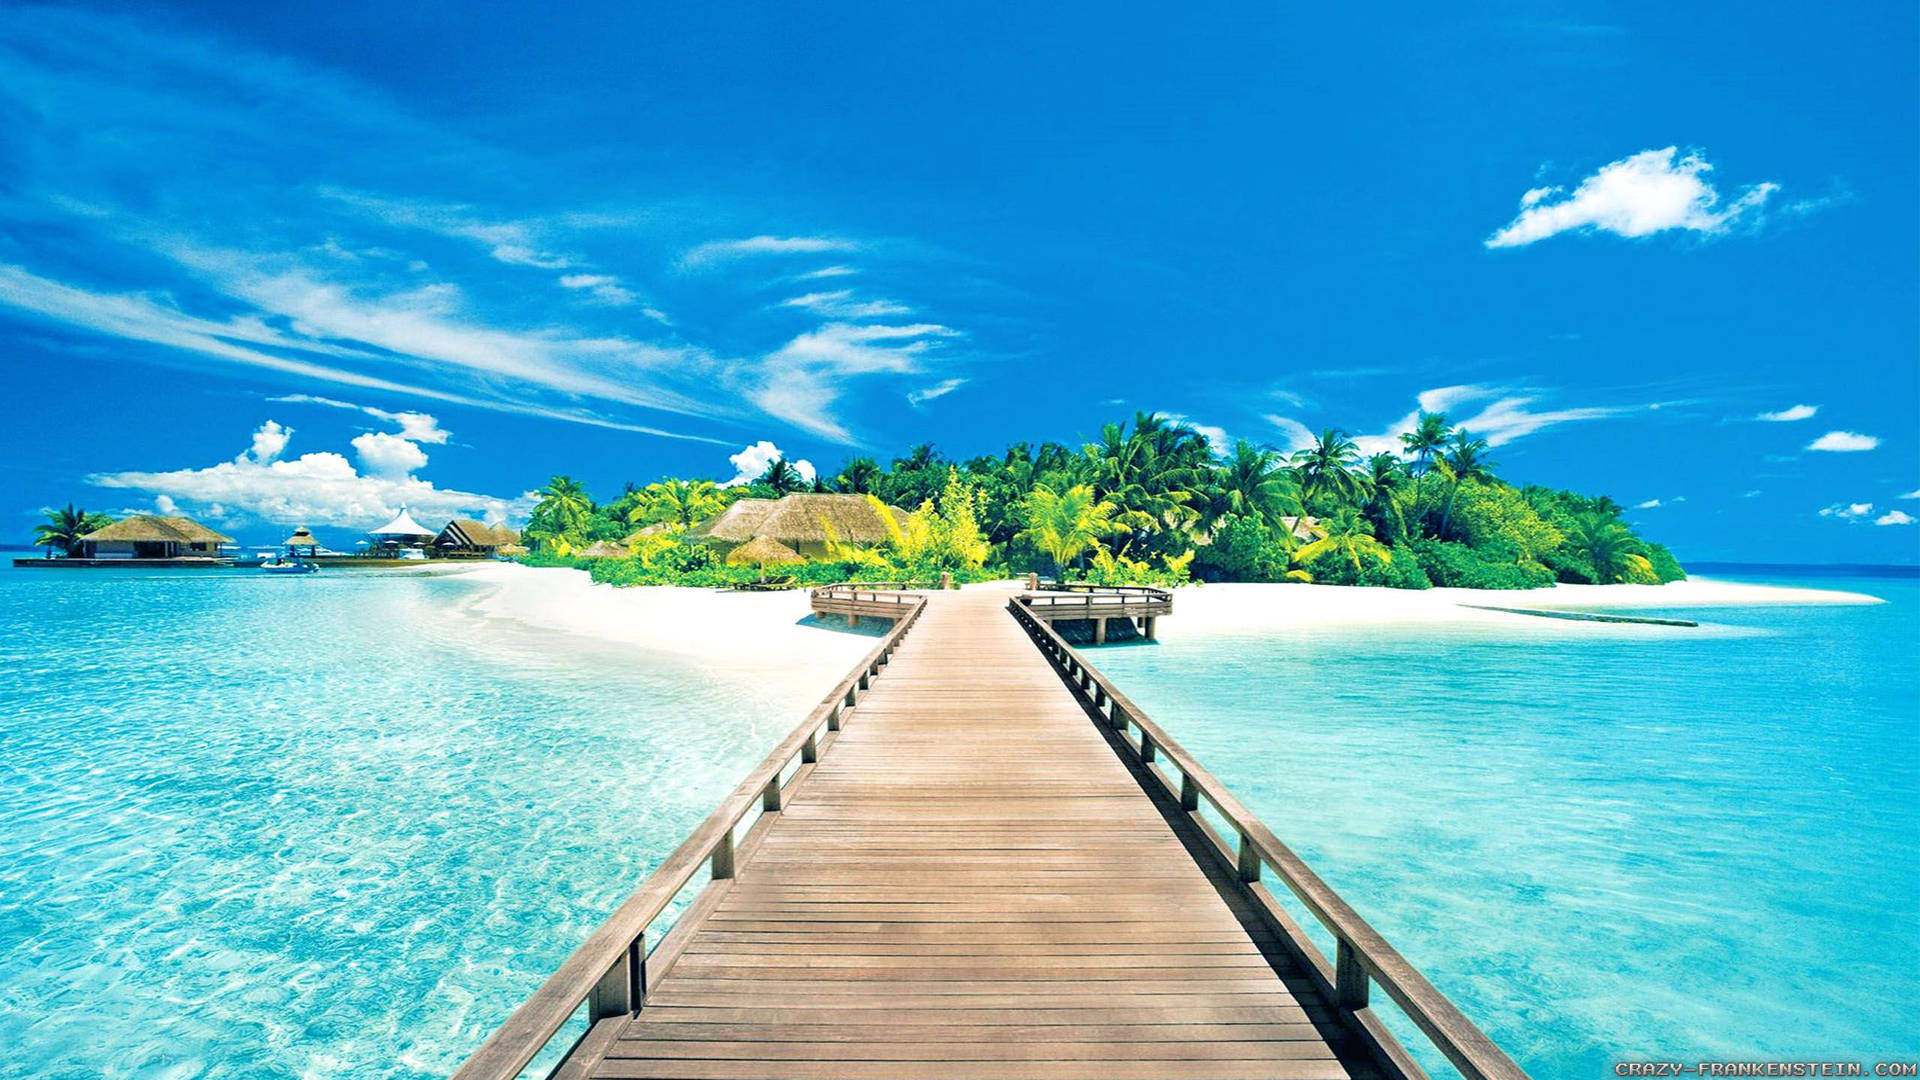 Fascinating HD wallpaper of dock on clear blue beach. 